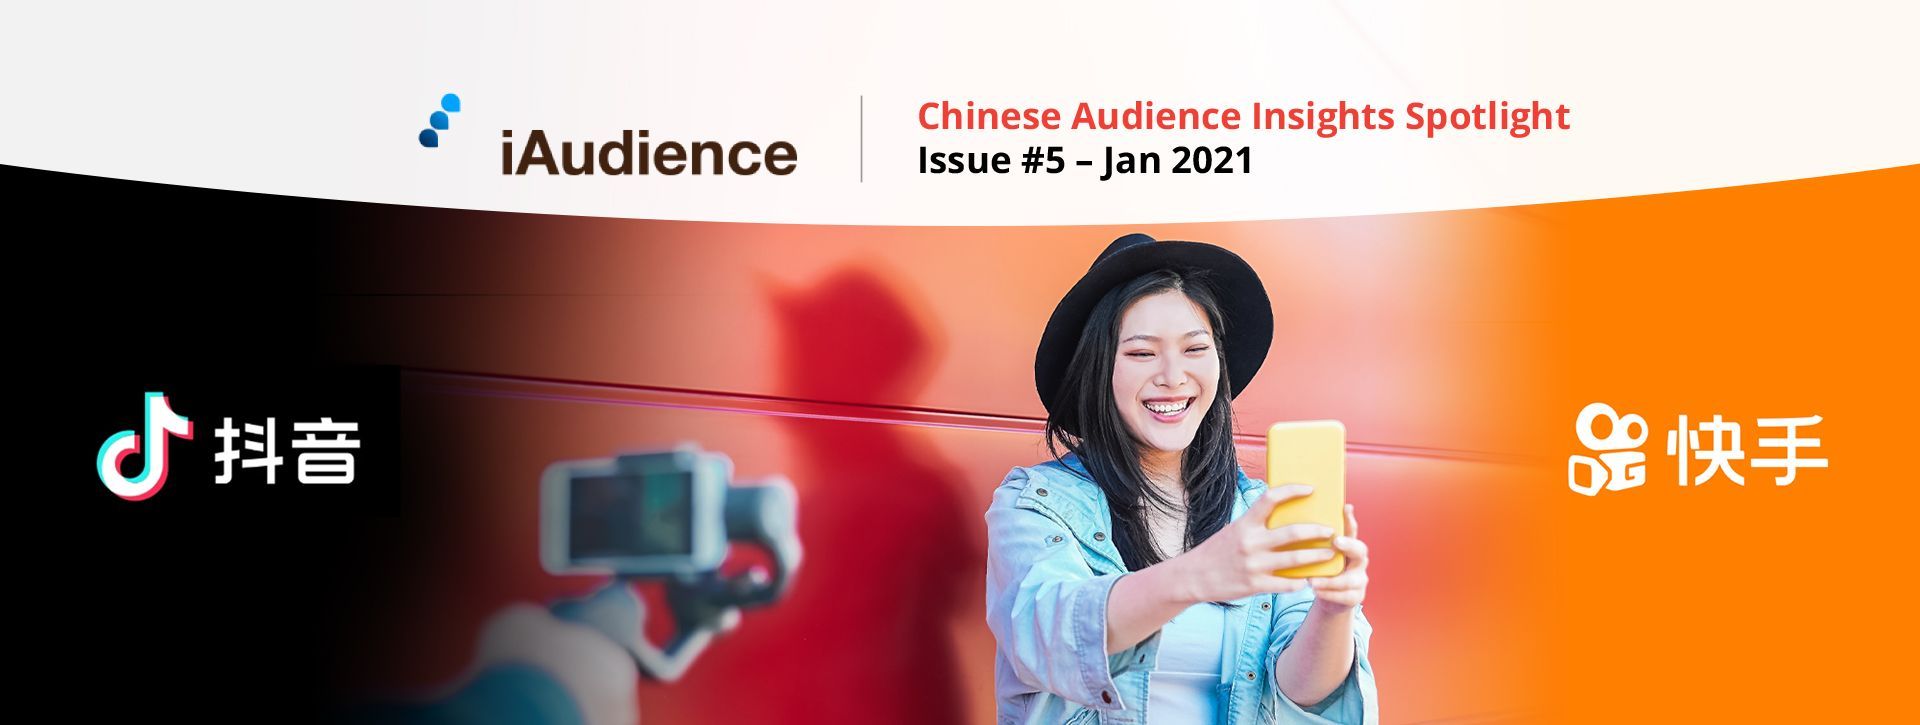 iAudience: Chinese Audiences Insights Spotlight Issue#5: Chinese Short Video Platforms in the spotlight